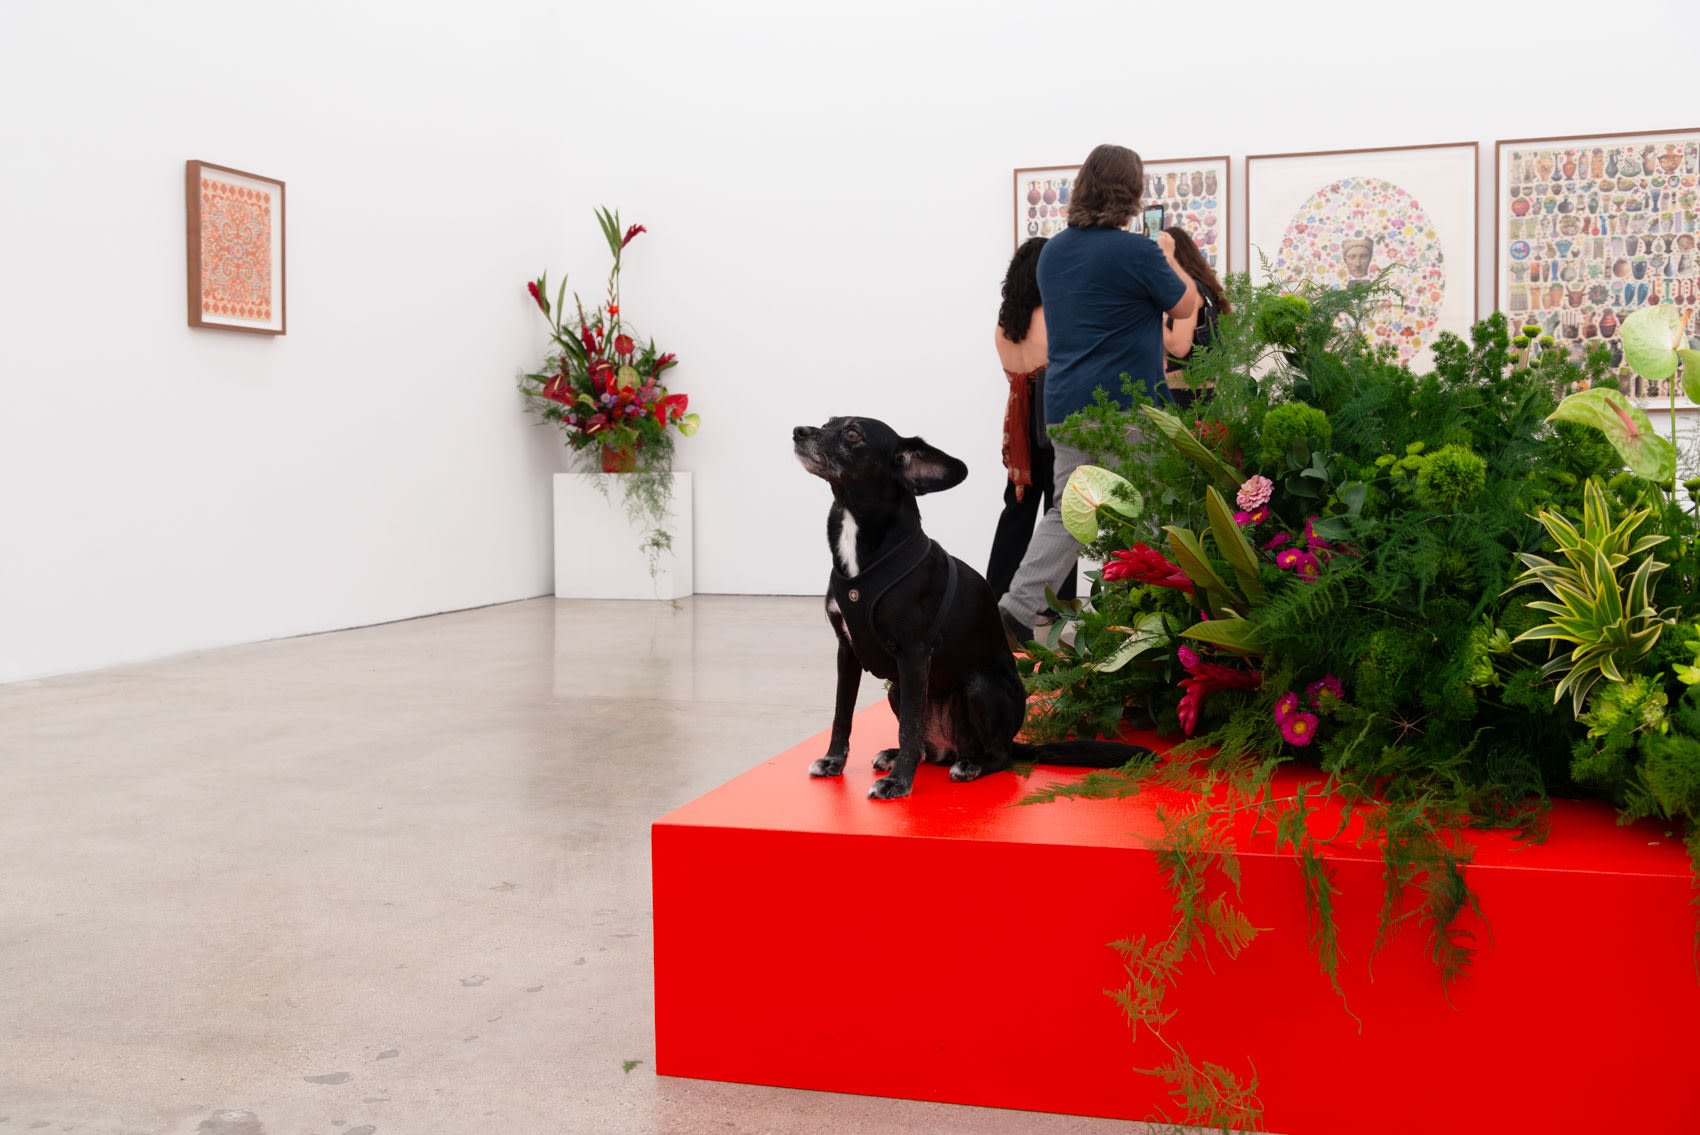 A small black dog sits on top of a bright red pedestall with a large floral installation on top in a white cube art gallery